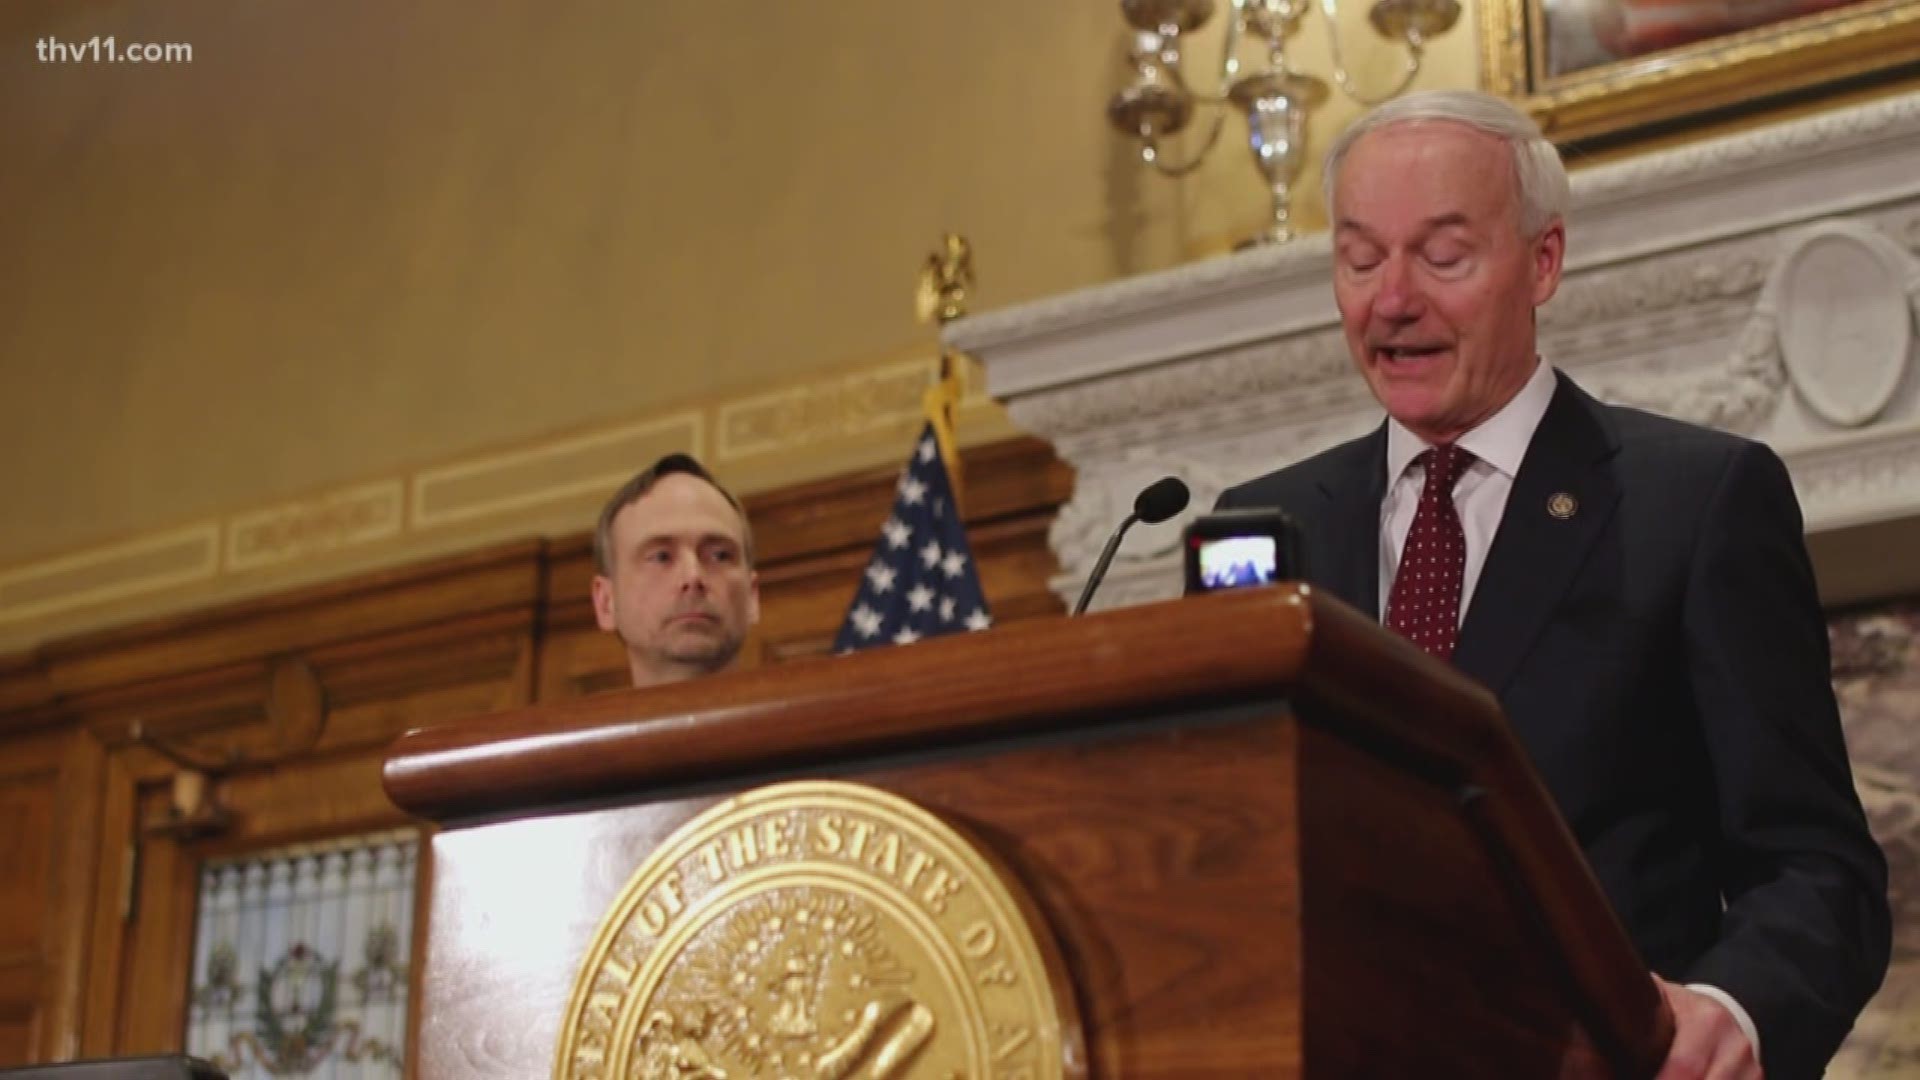 After the White House gives a national response, Gov. Hutchinson says Arkansas has been able to get ahead of the curve with coronavirus still just a remote threat.